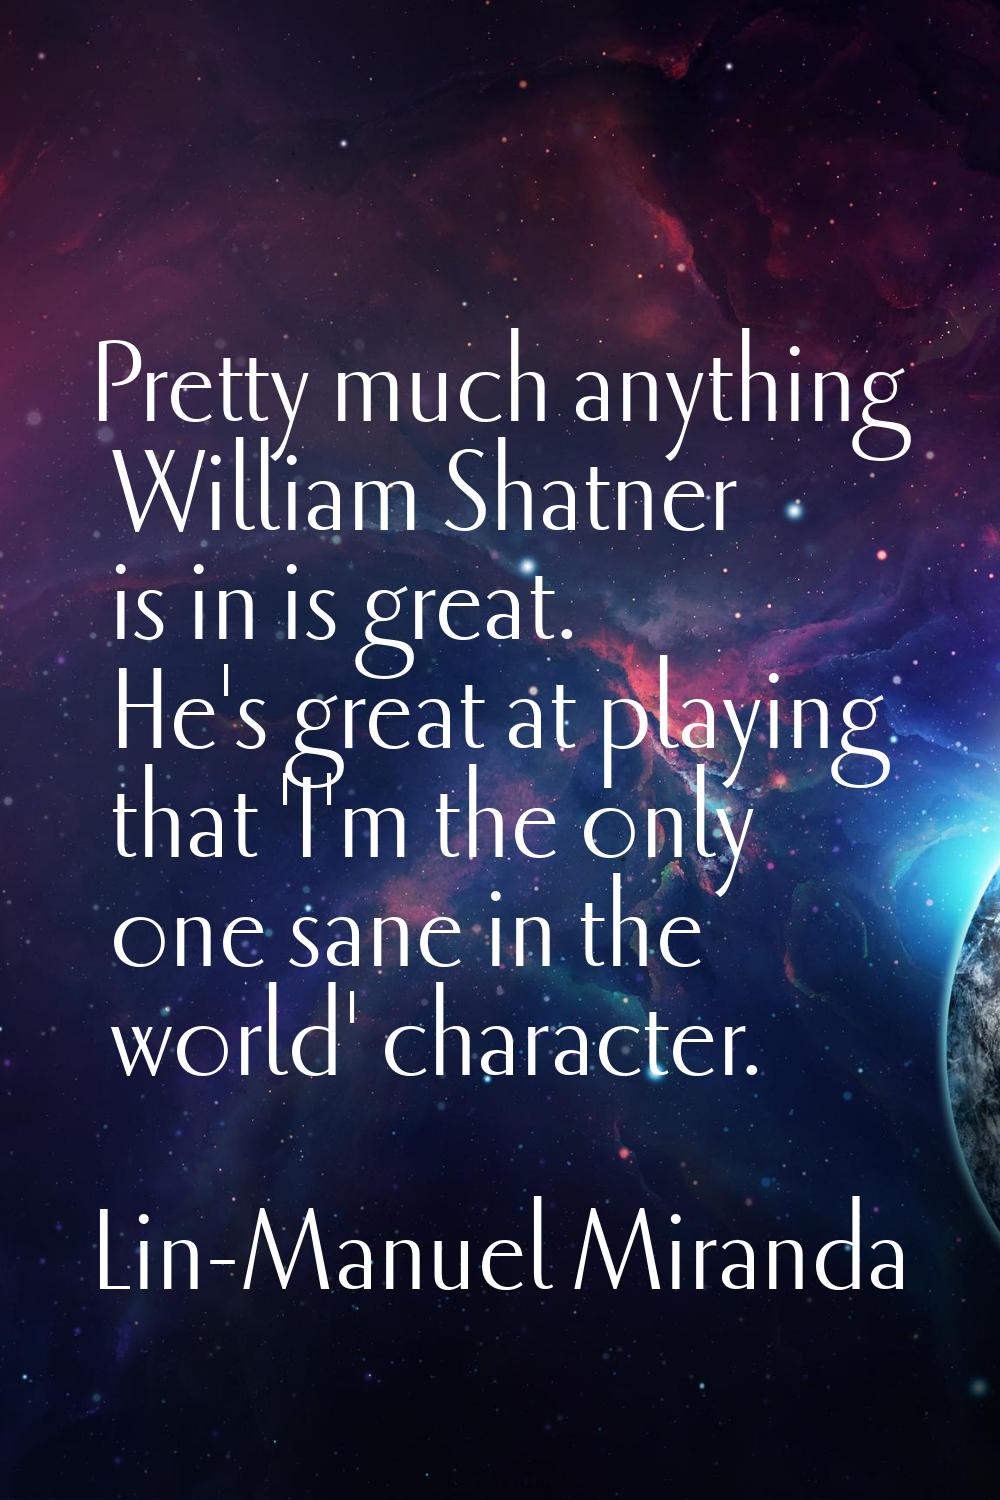 Pretty much anything William Shatner is in is great. He's great at playing that 'I'm the only one s